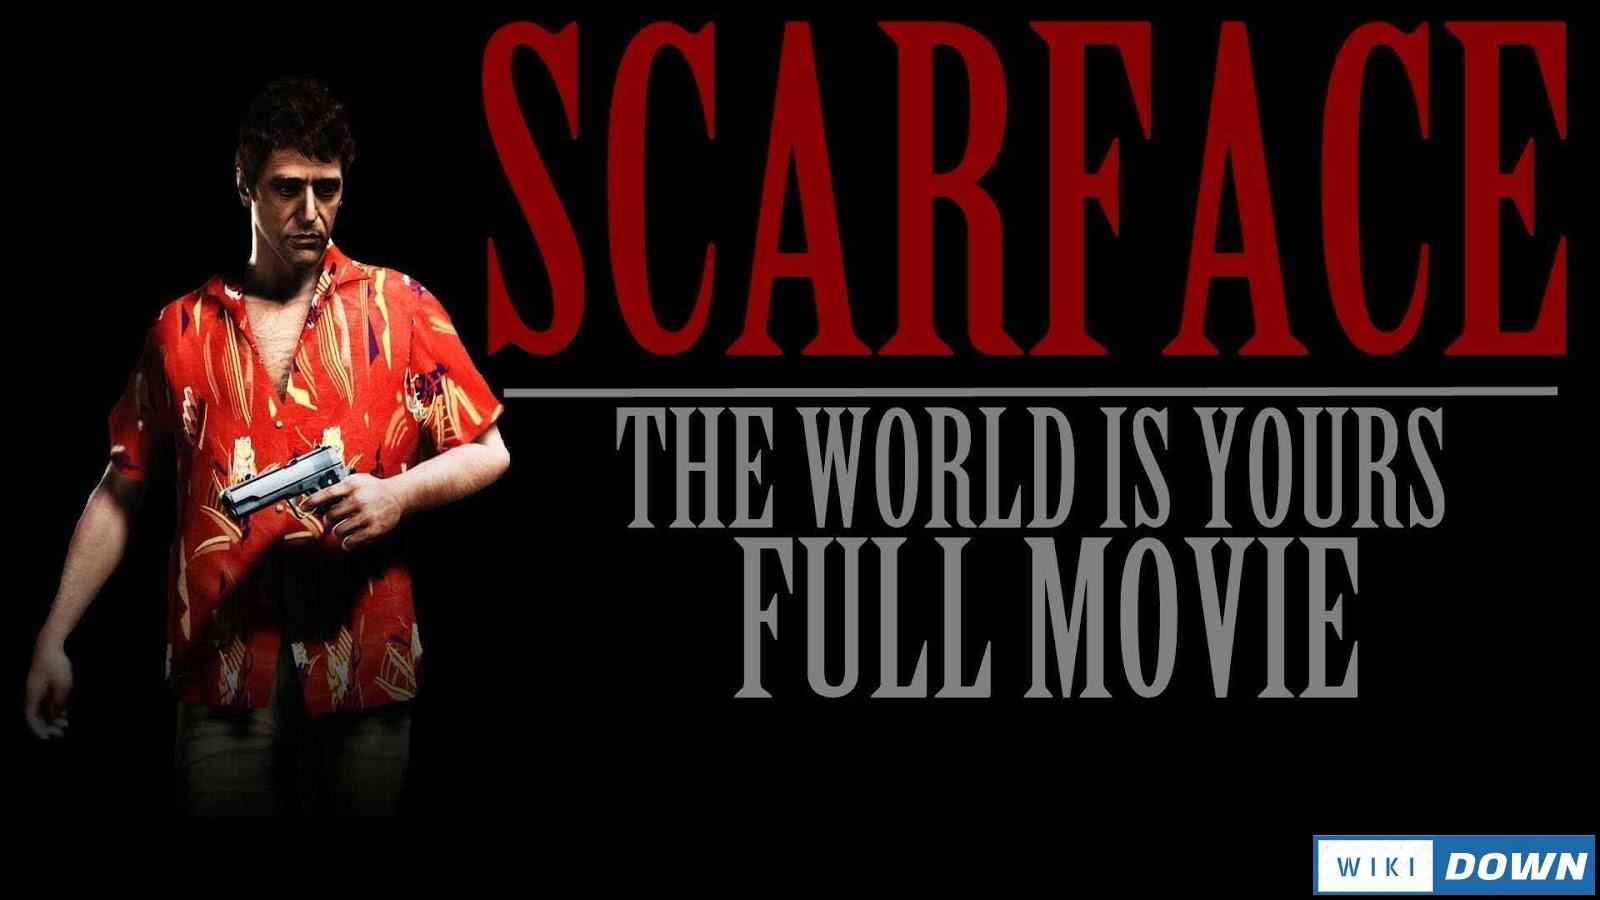 Download Scarface The World is Yours Mới Nhất